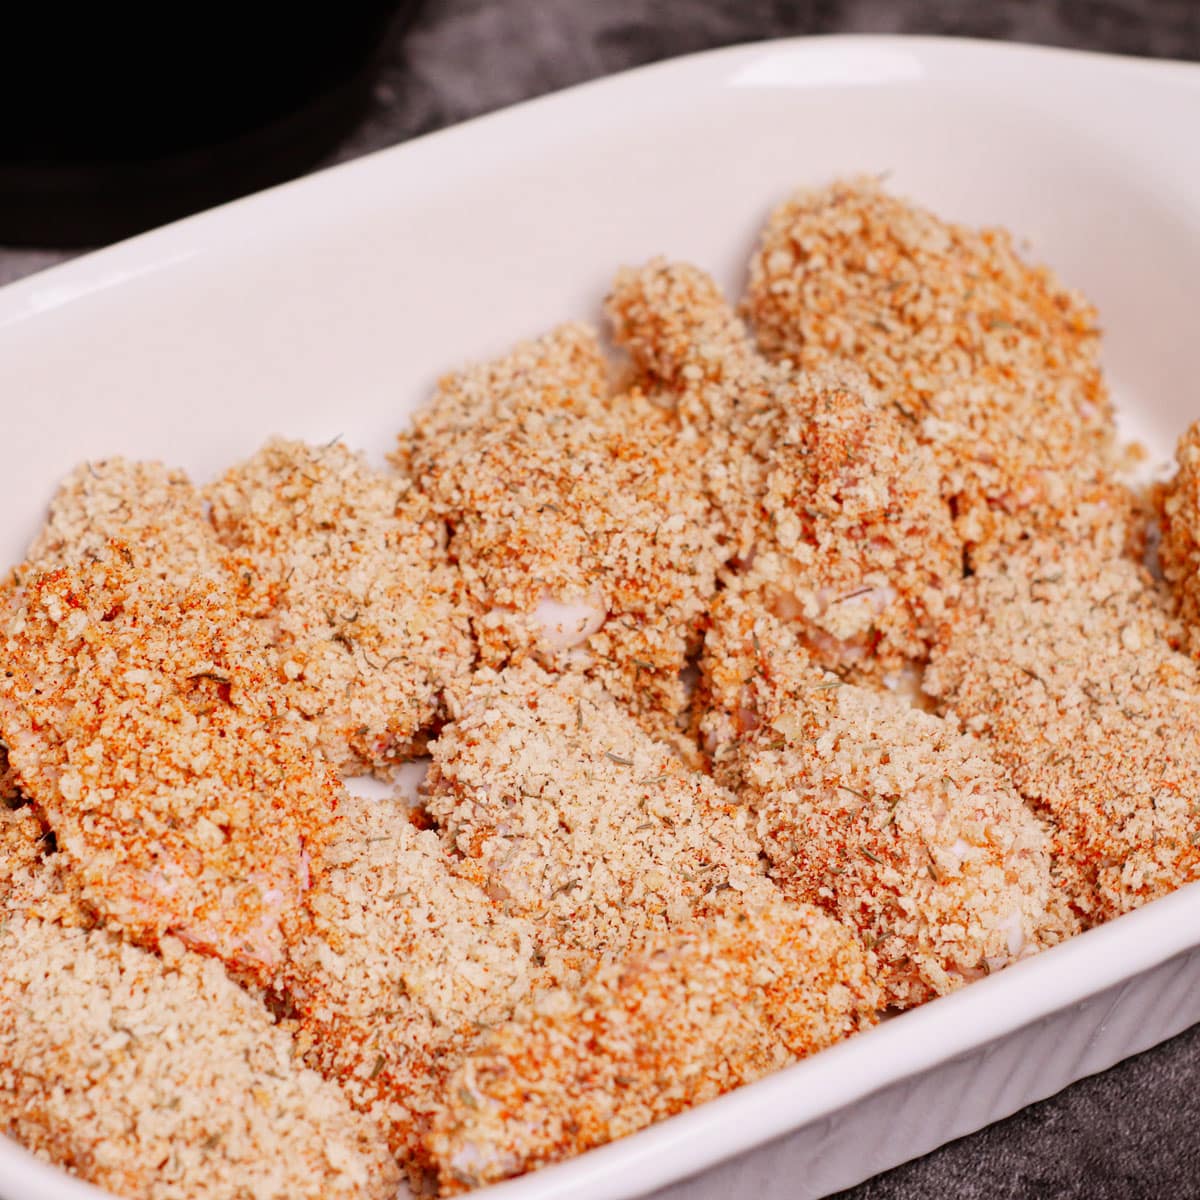 Uncooked breaded chicken wings in a serving dish.